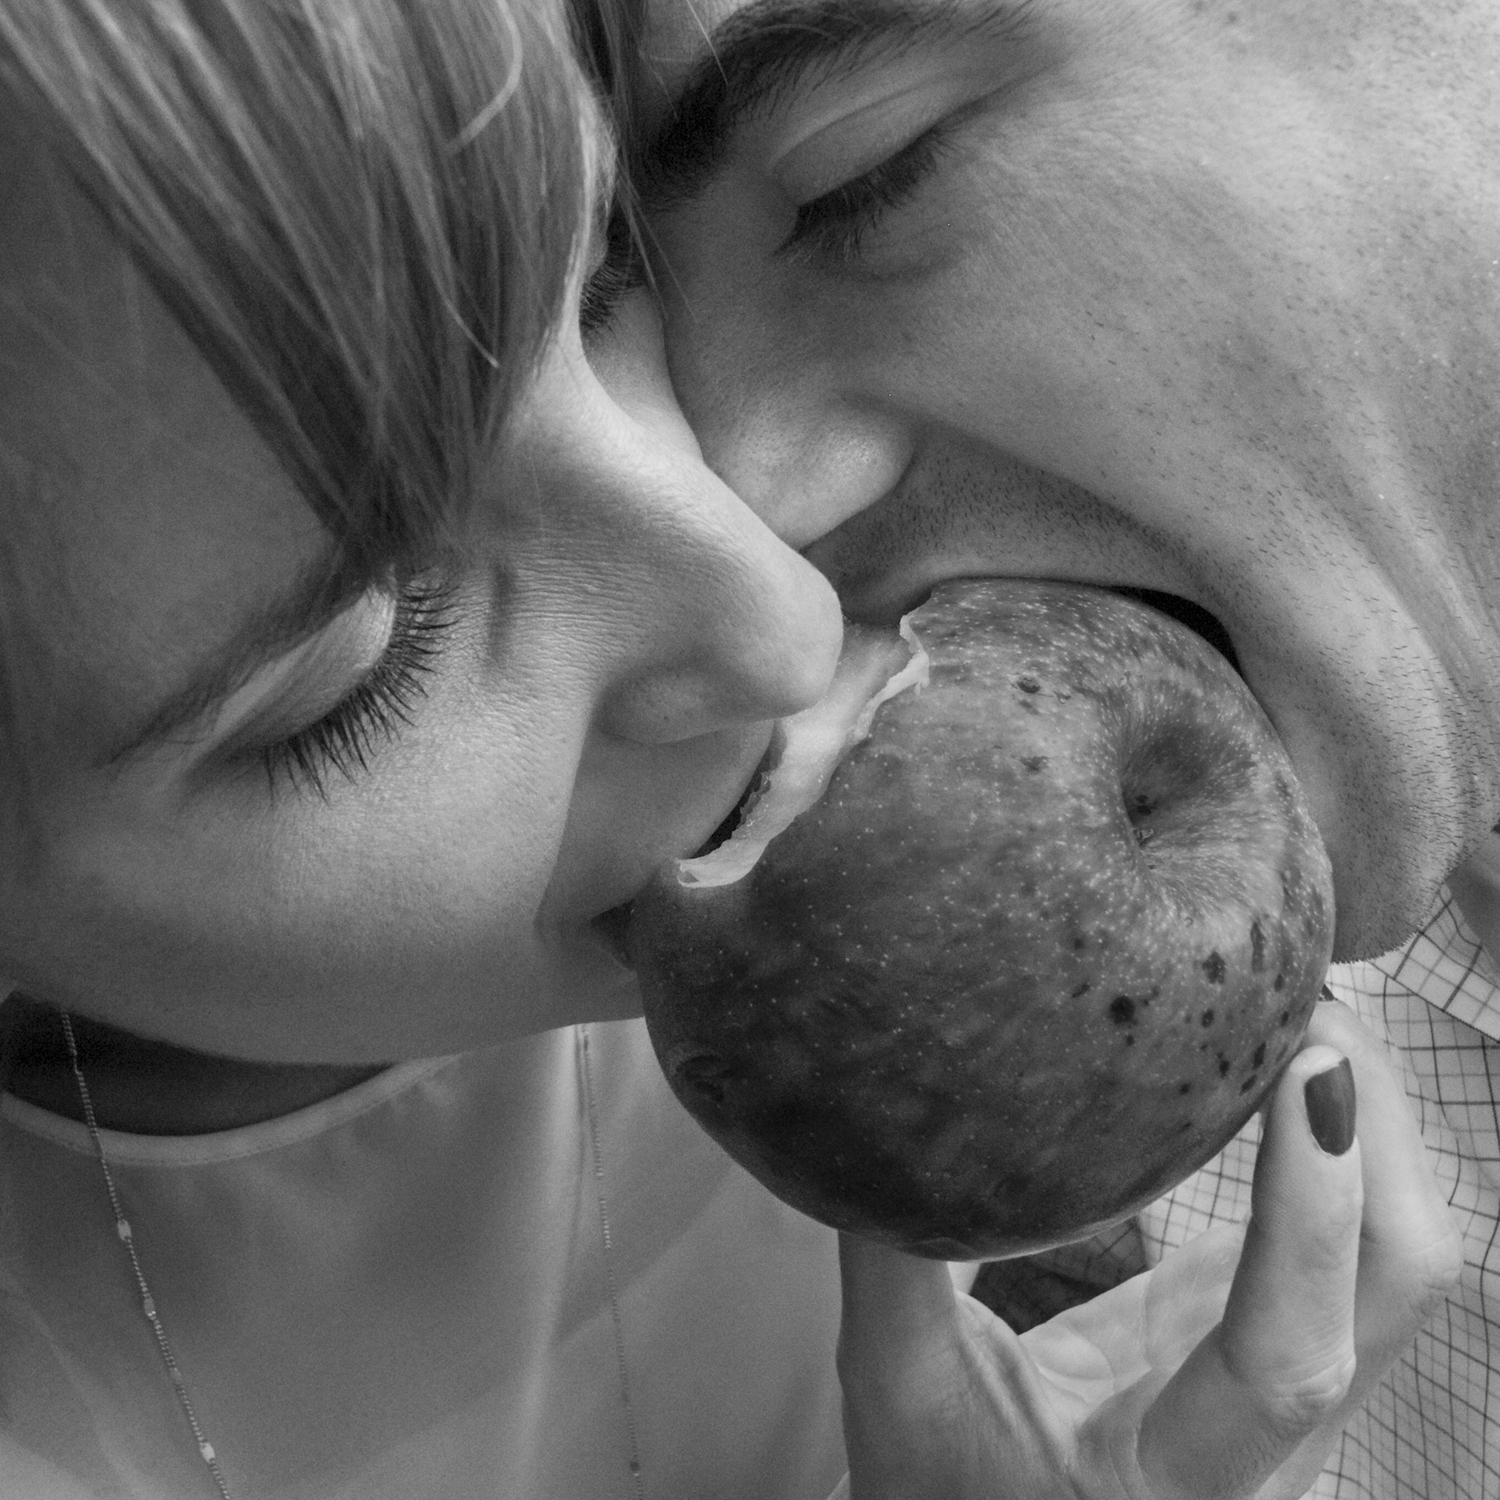 Black and white photo of two people biting into the same apple